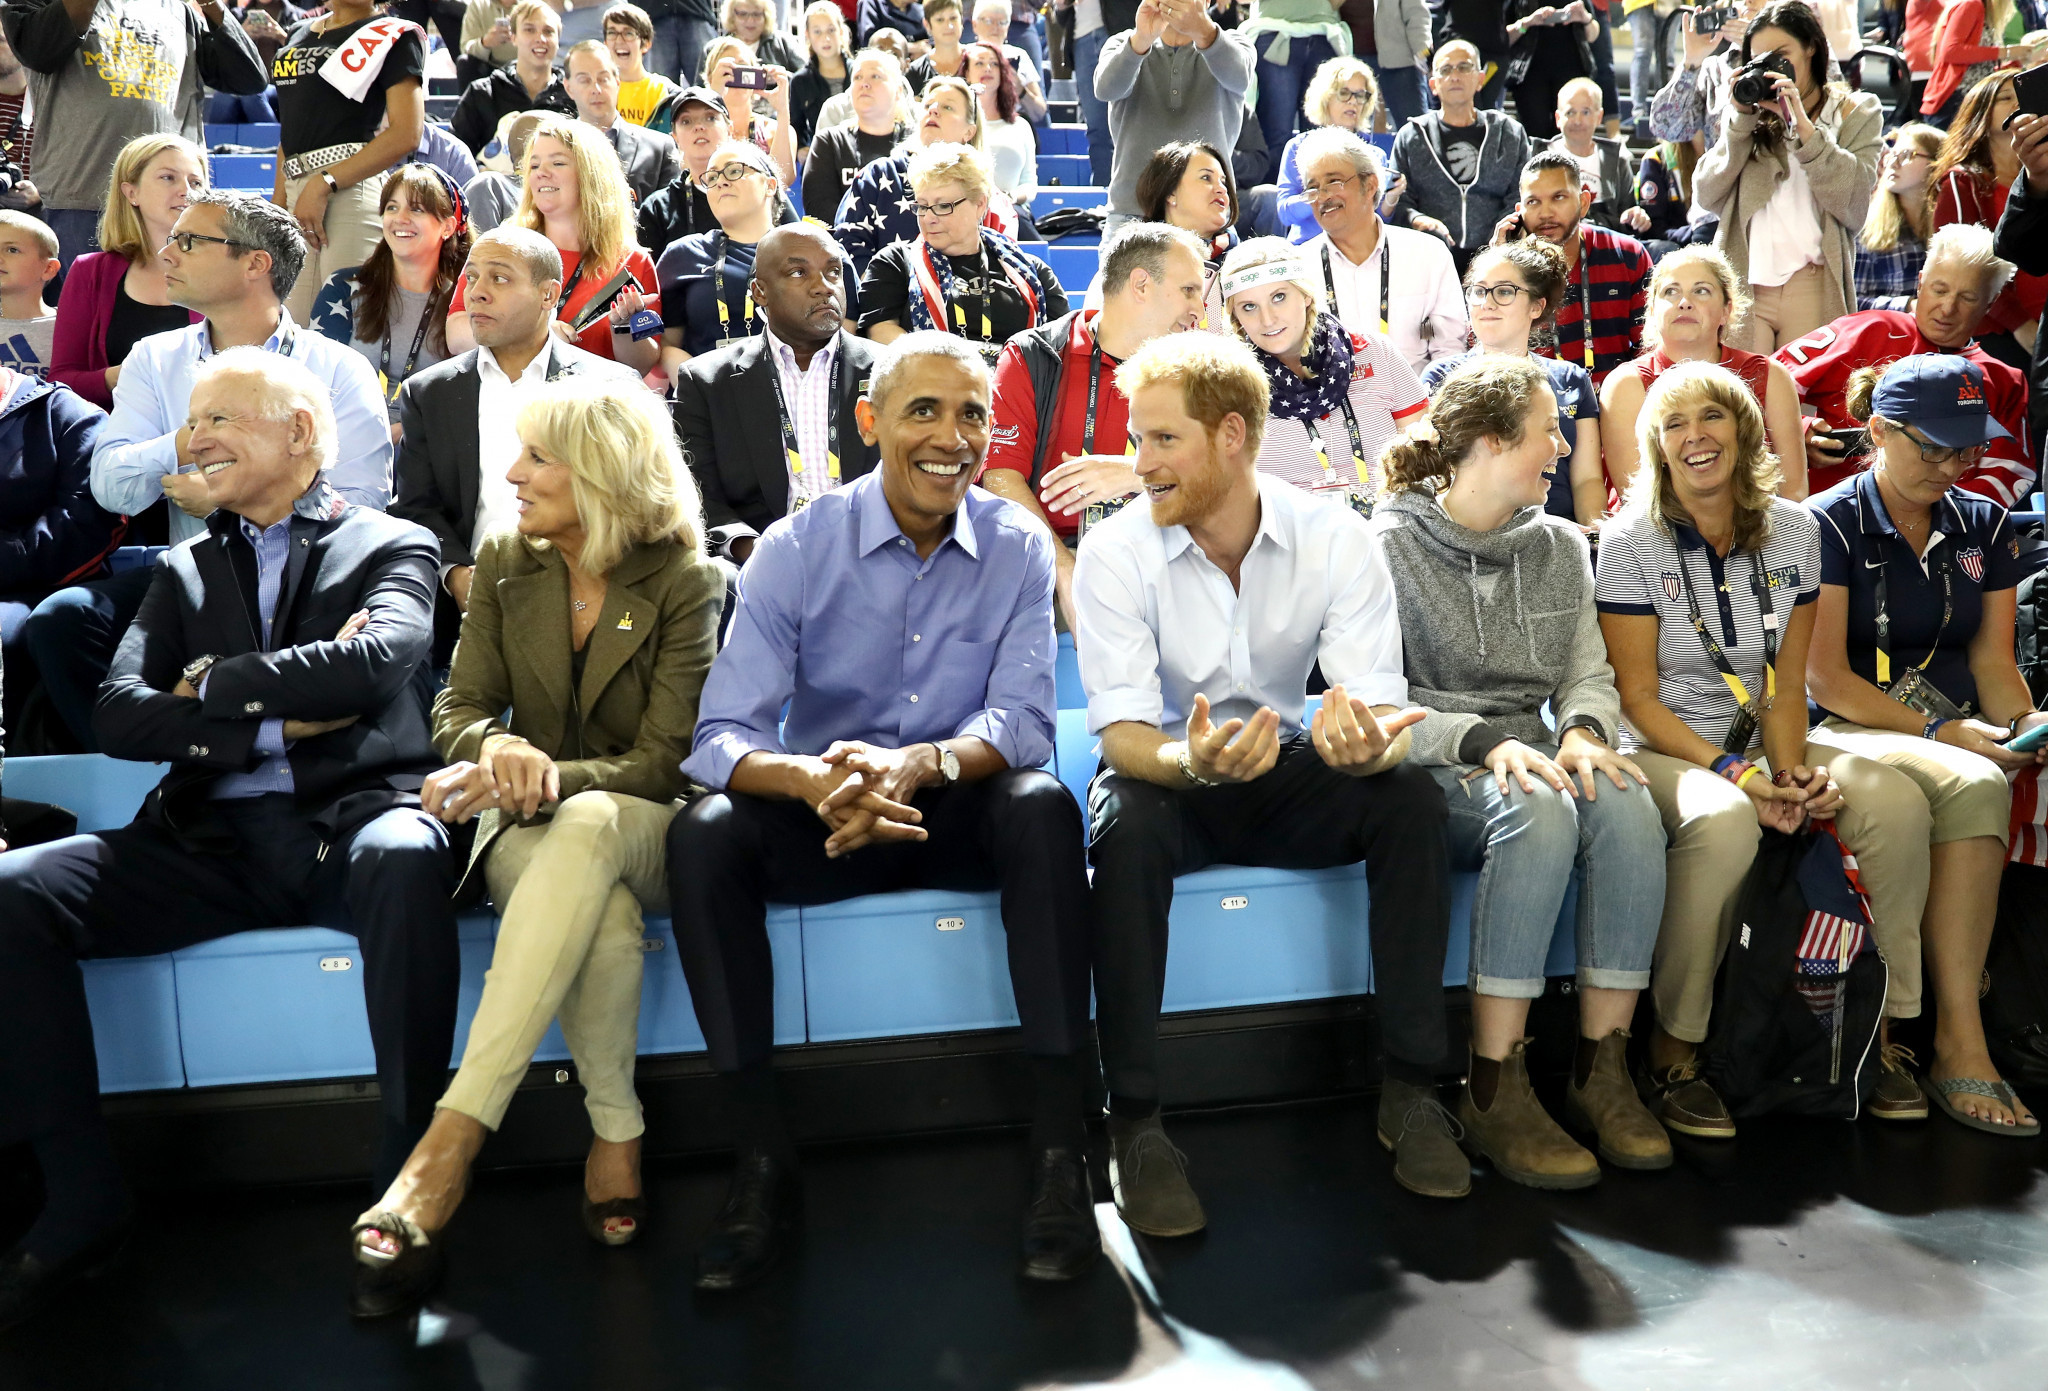 Former US President Barack Obama, former US vice-president Joe Biden, his wife Jill and Prince Harry watched wheelchair basketball action ©Getty Images